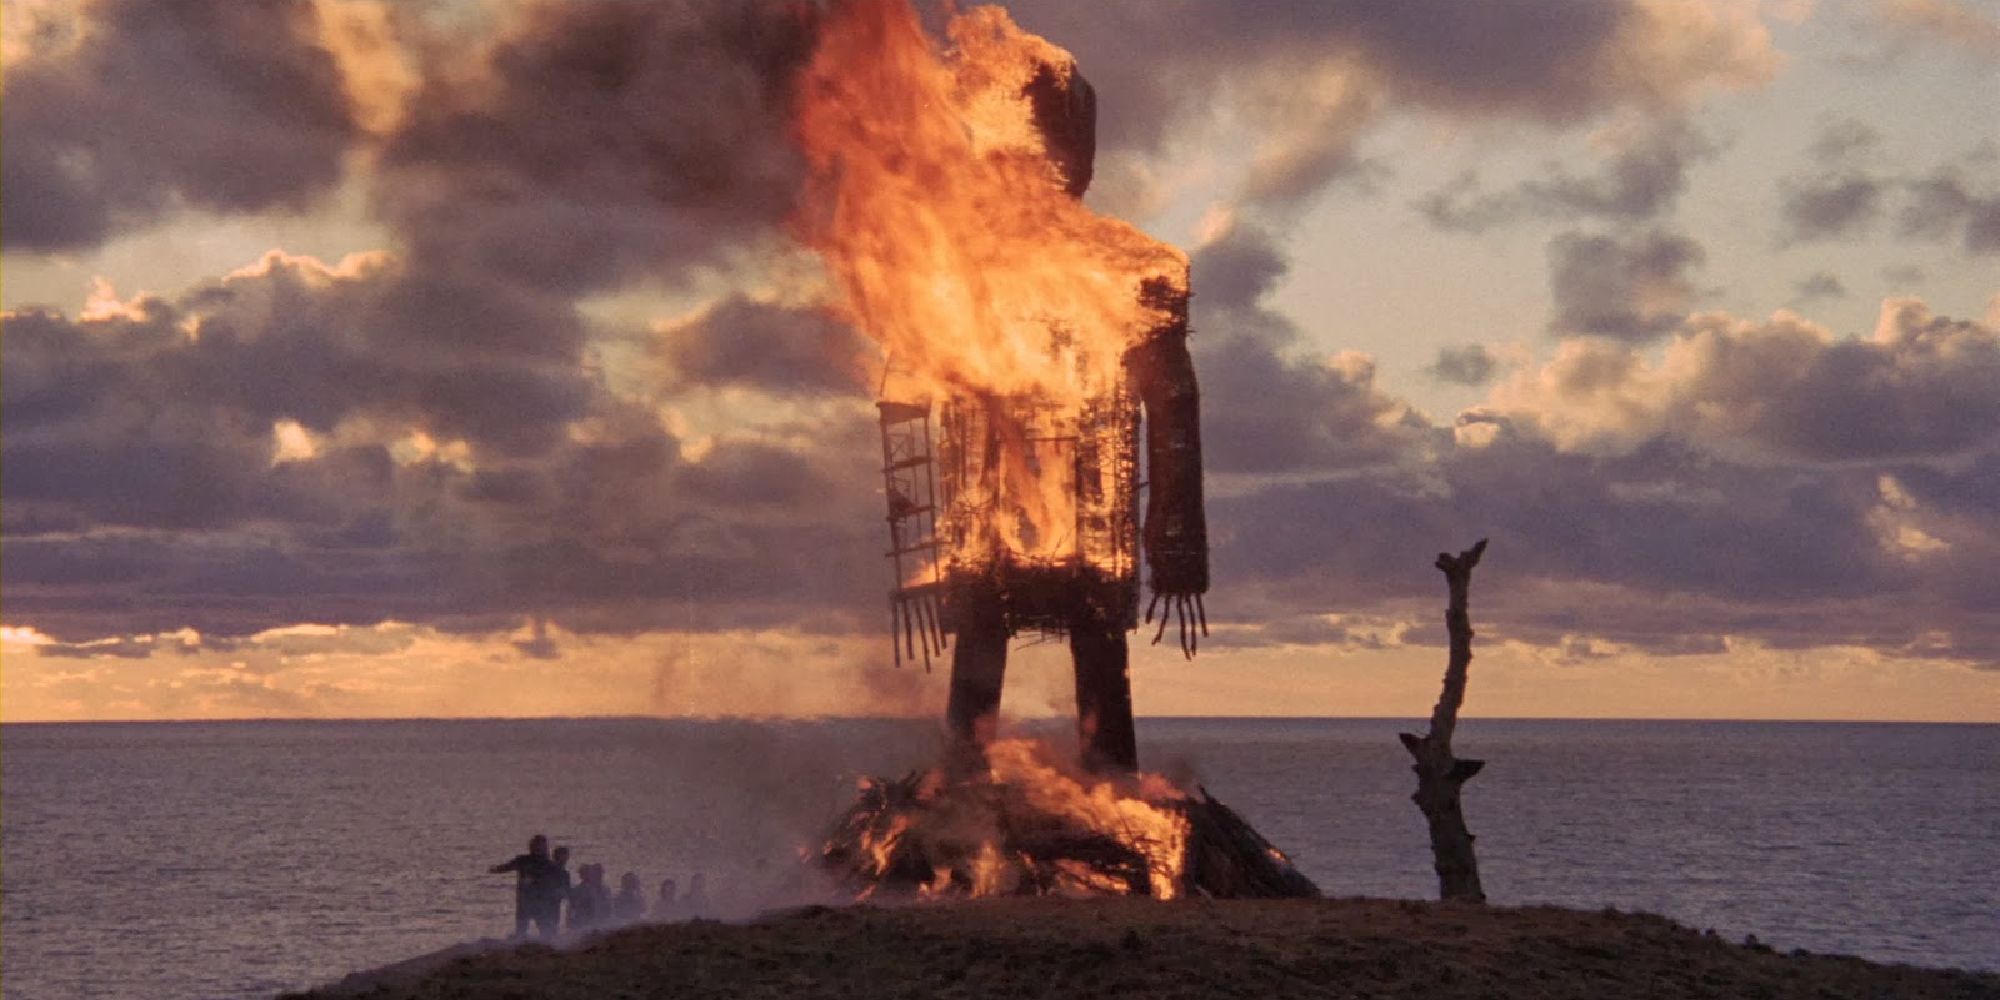 A giant wicker man burning underneath a sunset